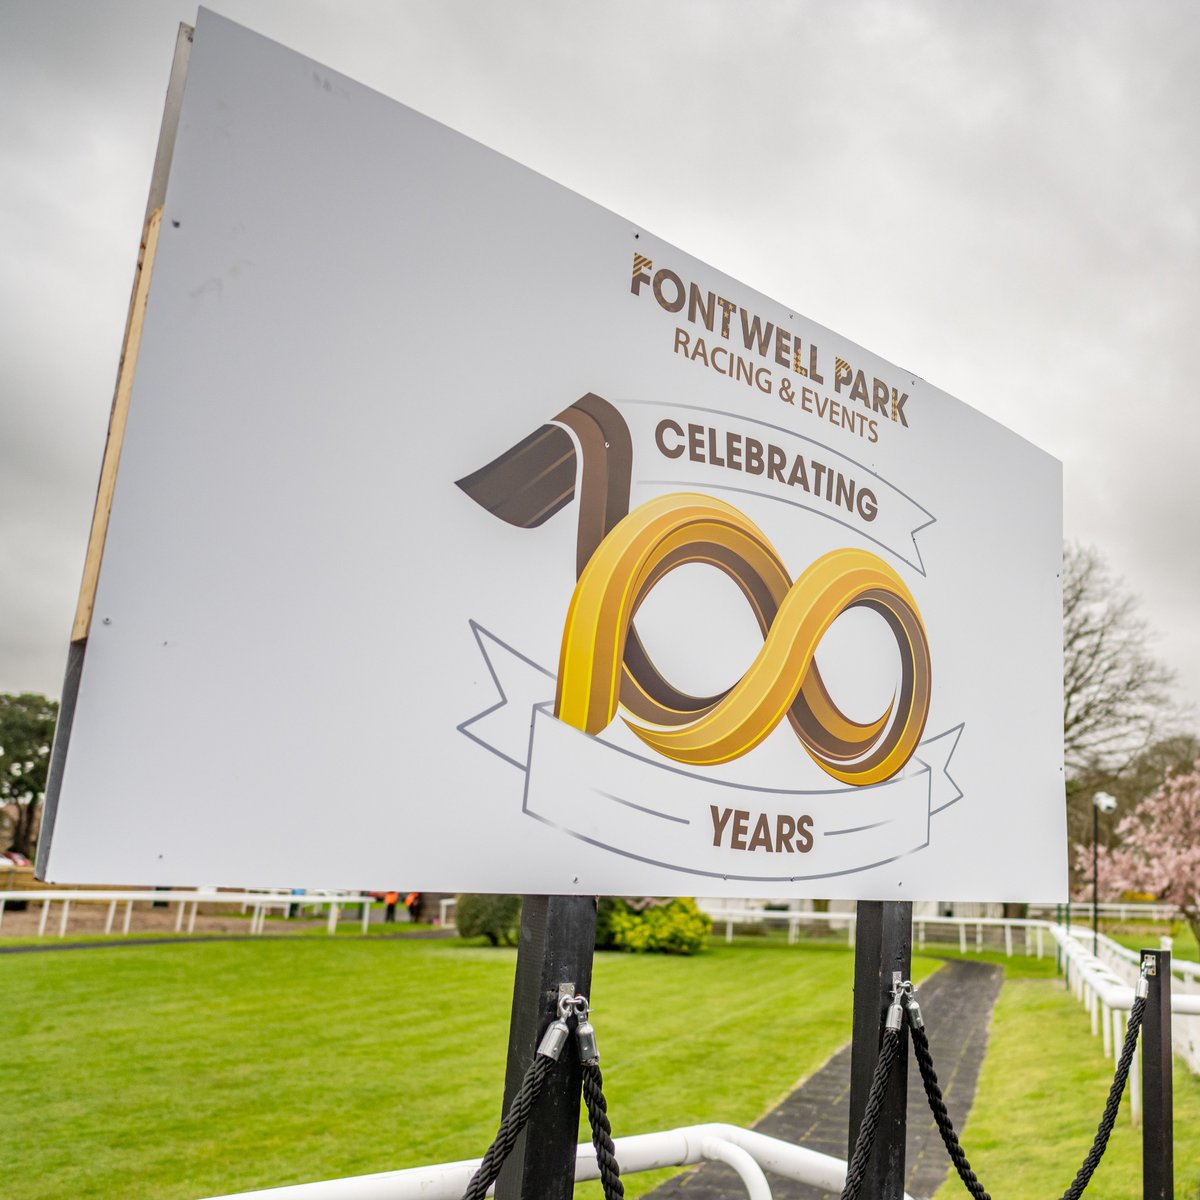 64 declared ahead of tomorrow's 100 year anniversary raceday, with runners from @gl_racing @DSkeltonRacing @sevenbarrows @benpauling1 and many, many more. Tickets just £19 in advance - save £5 off the on the day price! ➡️ fontwellpark.co.uk/whats-on/cente…